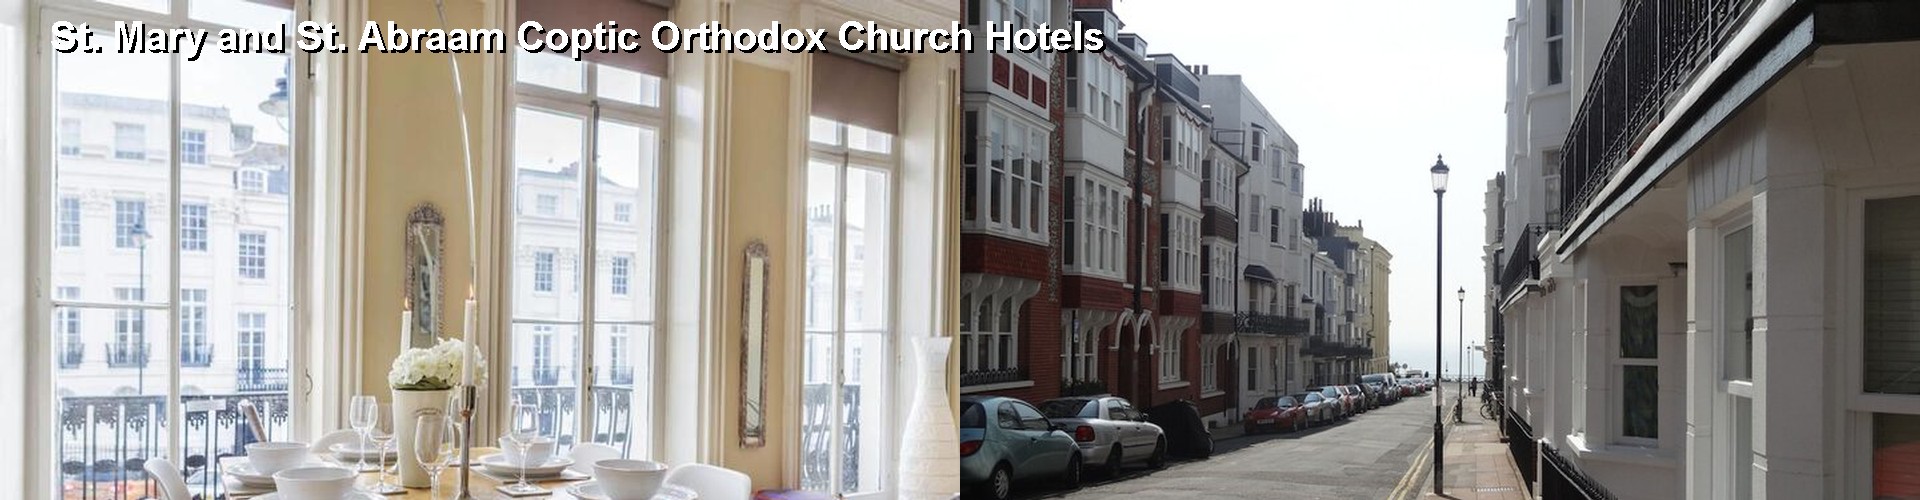 3 Best Hotels near St. Mary and St. Abraam Coptic Orthodox Church